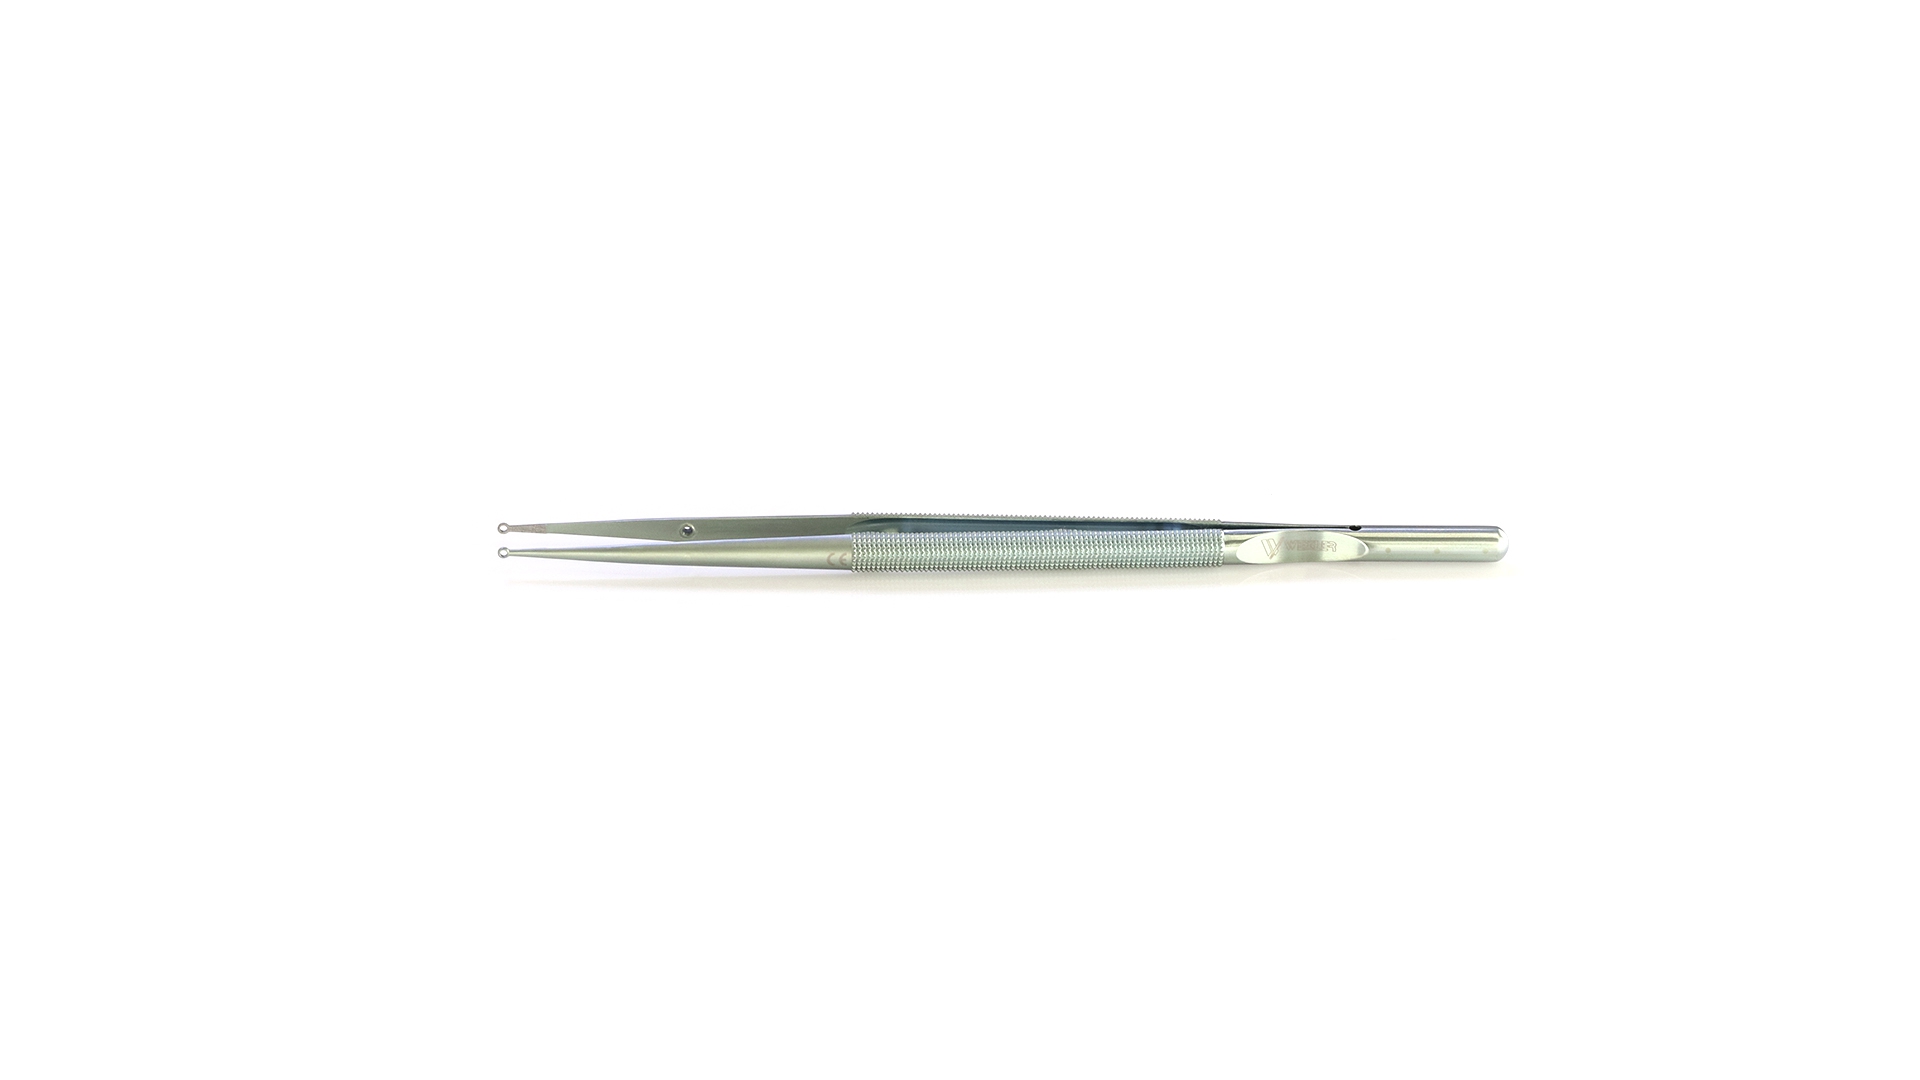 Ring tip Forceps - Straight 2.5mm rings w/TC coated platform